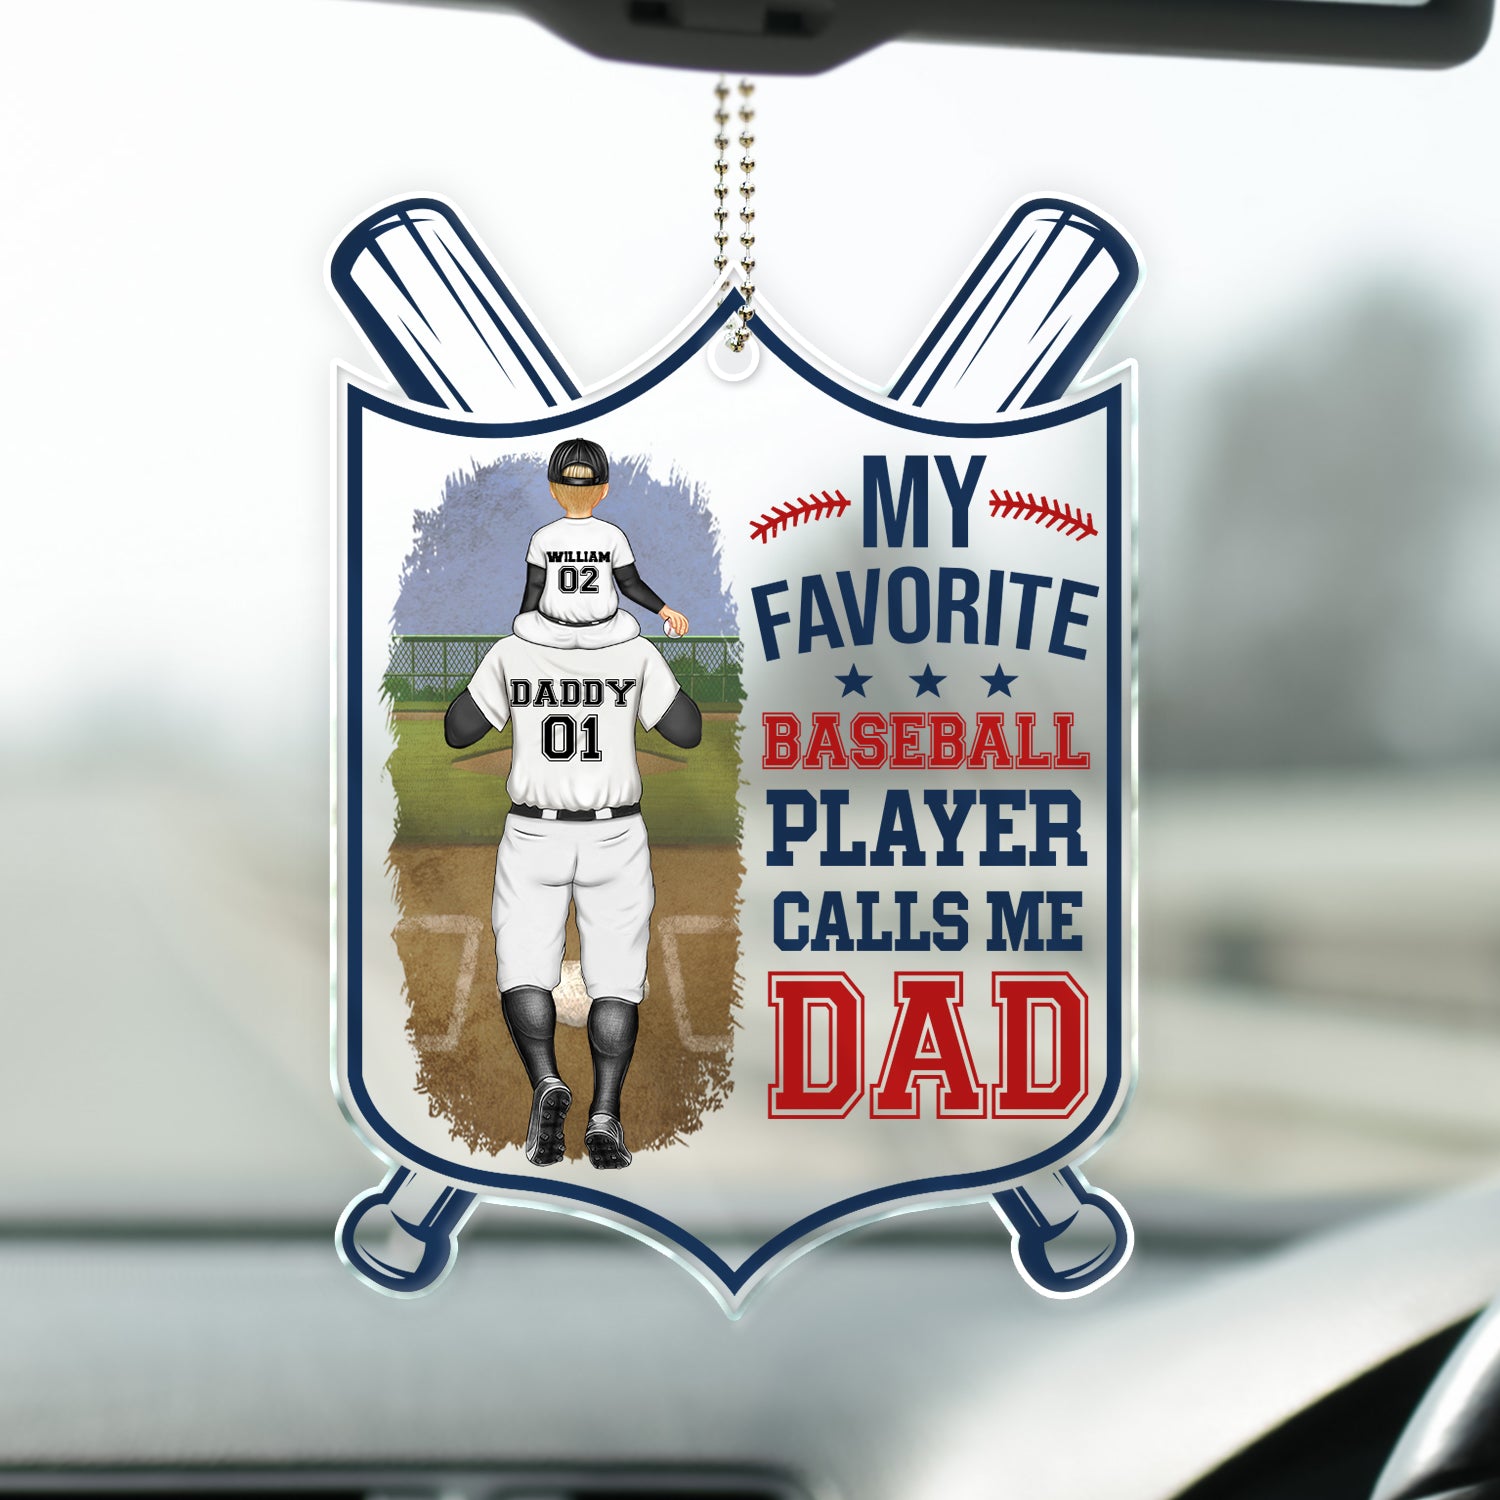 My Favorite Baseball Player Calls Me Dad - Gift For Father, Sport Fans - Personalized Acrylic Car Hanger